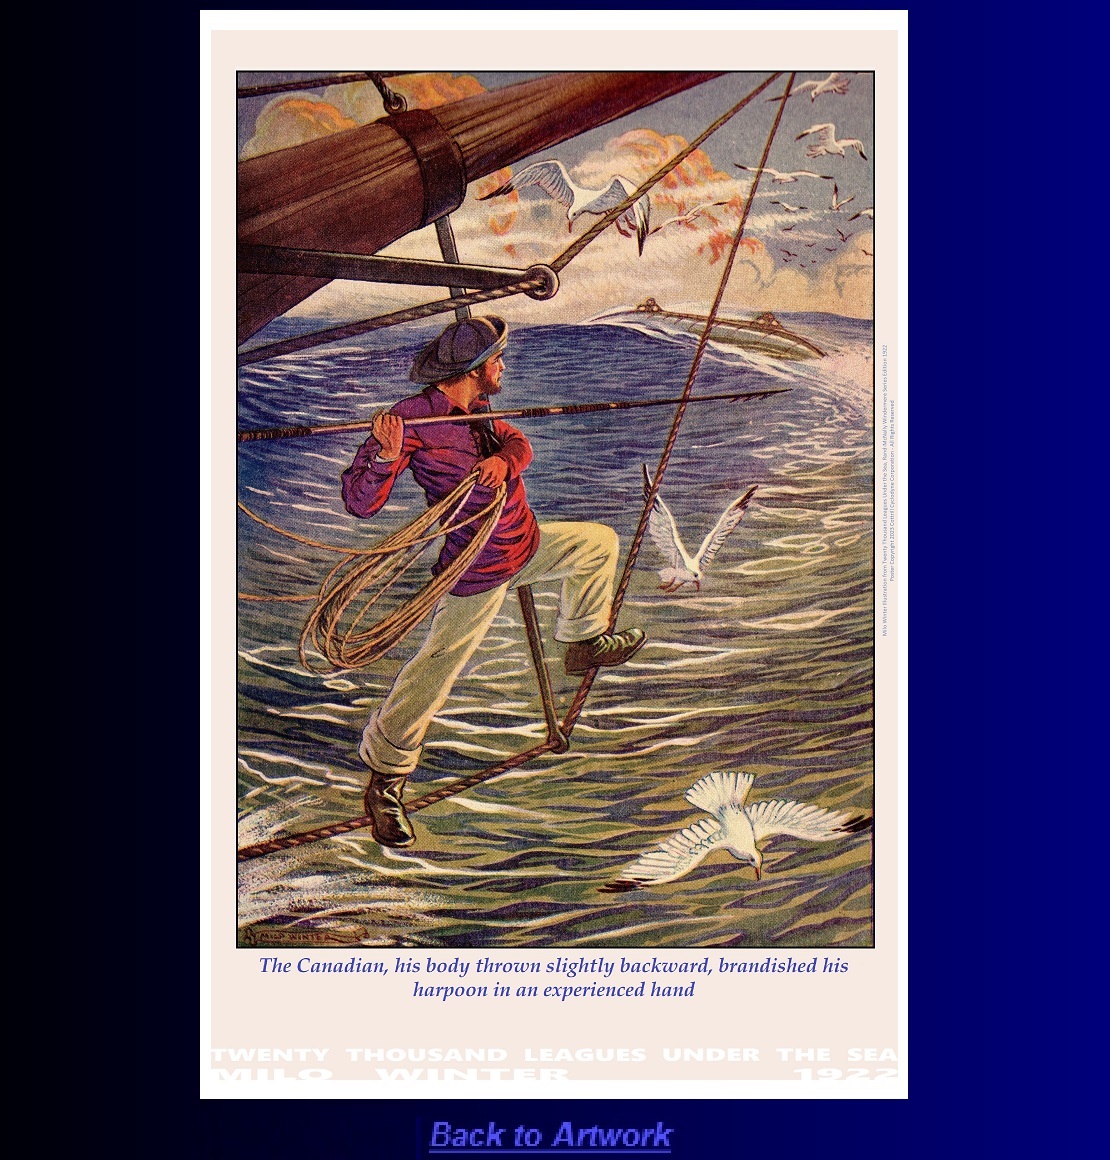 Portrait poster: The Canadian Brandished His Harpoon by Milo Winter